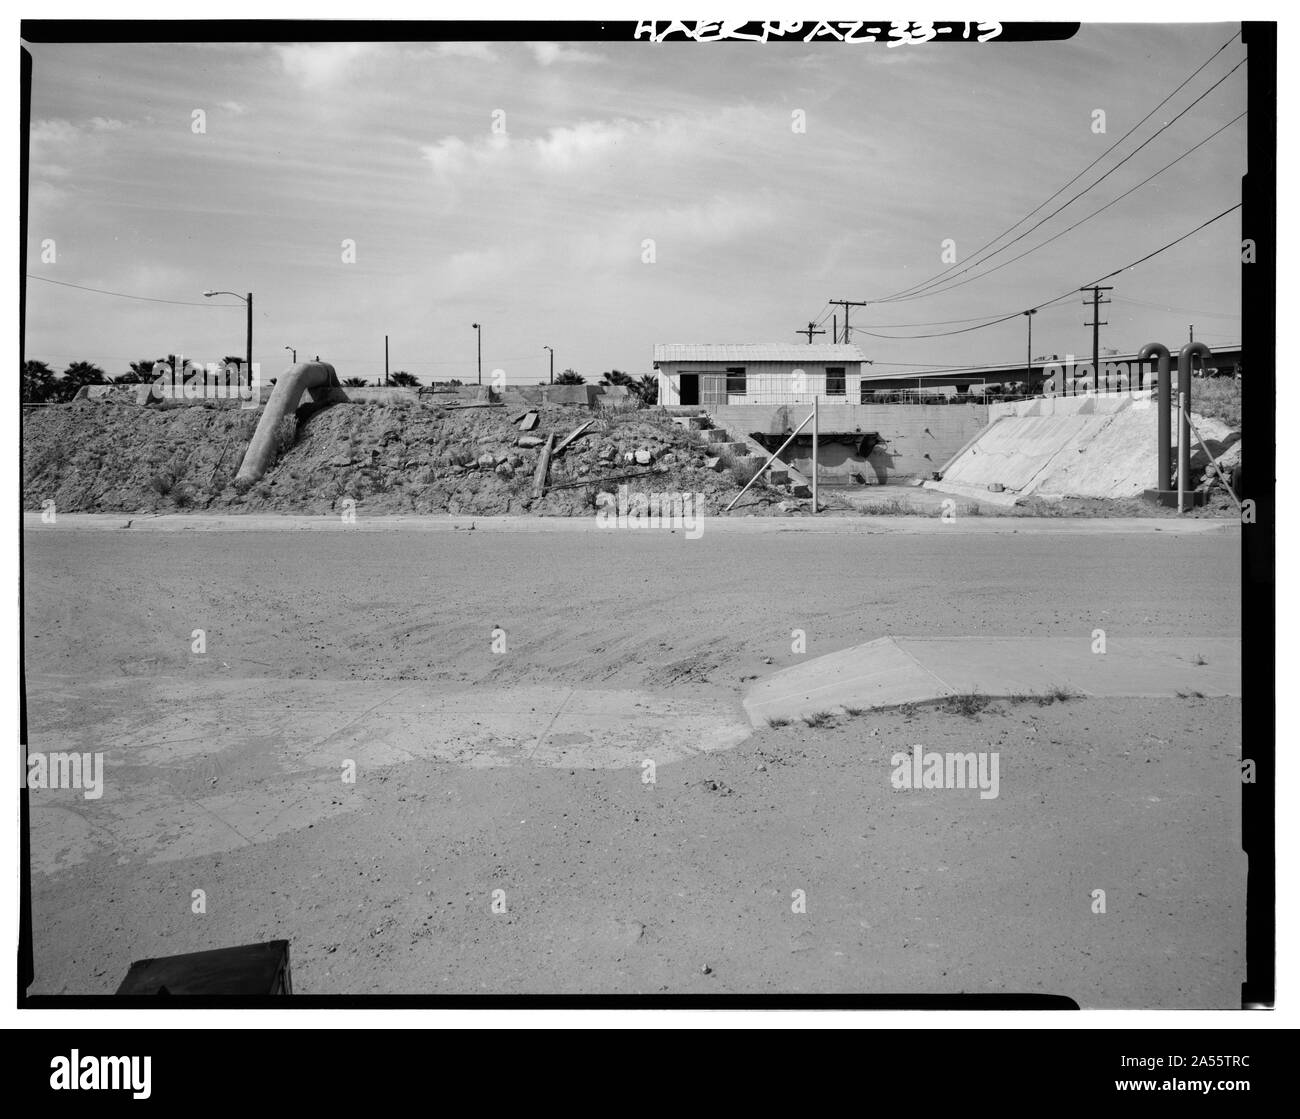 VIEW LOOKING NORTH TOWARD THE SOUTH END OF SETTLING RESERVOIR NO. 1 (LEFT) AND REMNANT OF SETTLING RESERVOIR NO. 2 (RIGHT). THE NONHISTORIC CHEMICAL BUILDING IS SEEN IN THE CENTER BACKGROUND. THE SOUTH WALL AND SOUTH BERM OF RESERVOIR NO. 2 WERE REMOVED CIRCA 1944. JONES STREET IS IN THE FOREGROUND. - Yuma Main Street Water Treatment Plant, Jones Street at foot of Main Street, Yuma, Yuma County, AZ Stock Photo